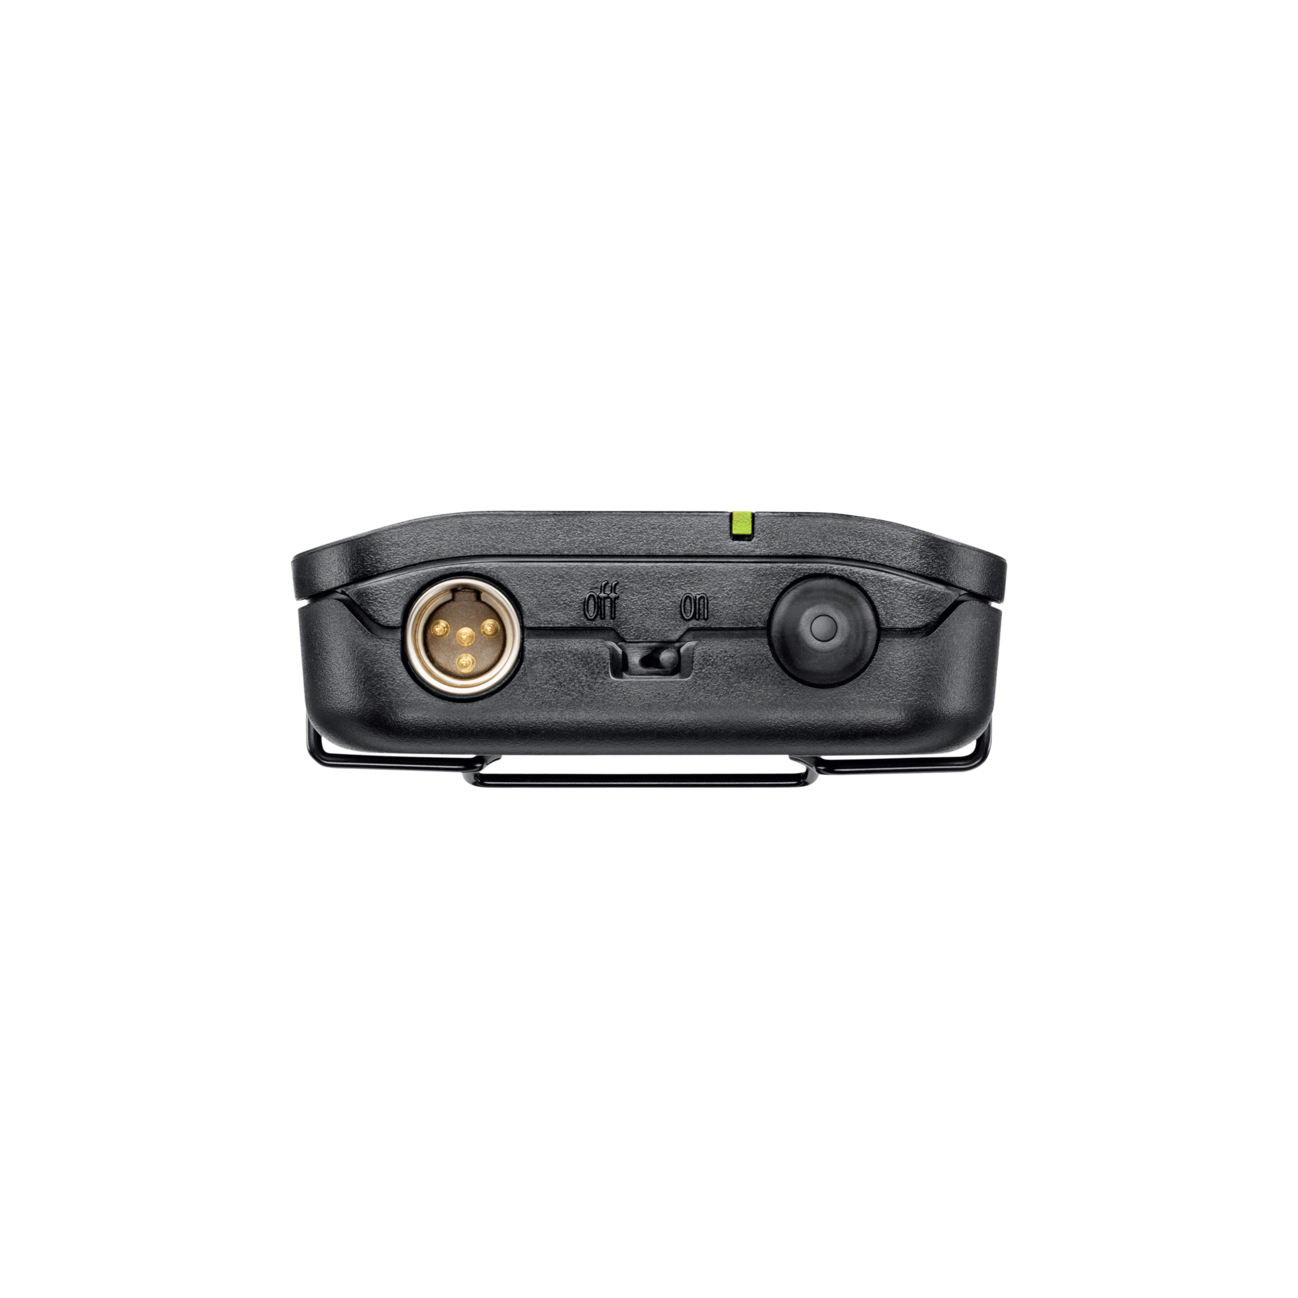 Shure BLX188/CVL Wireless Dual Presenter System with two CVL Lavalier Microphones, H9 512MHz-542MHz